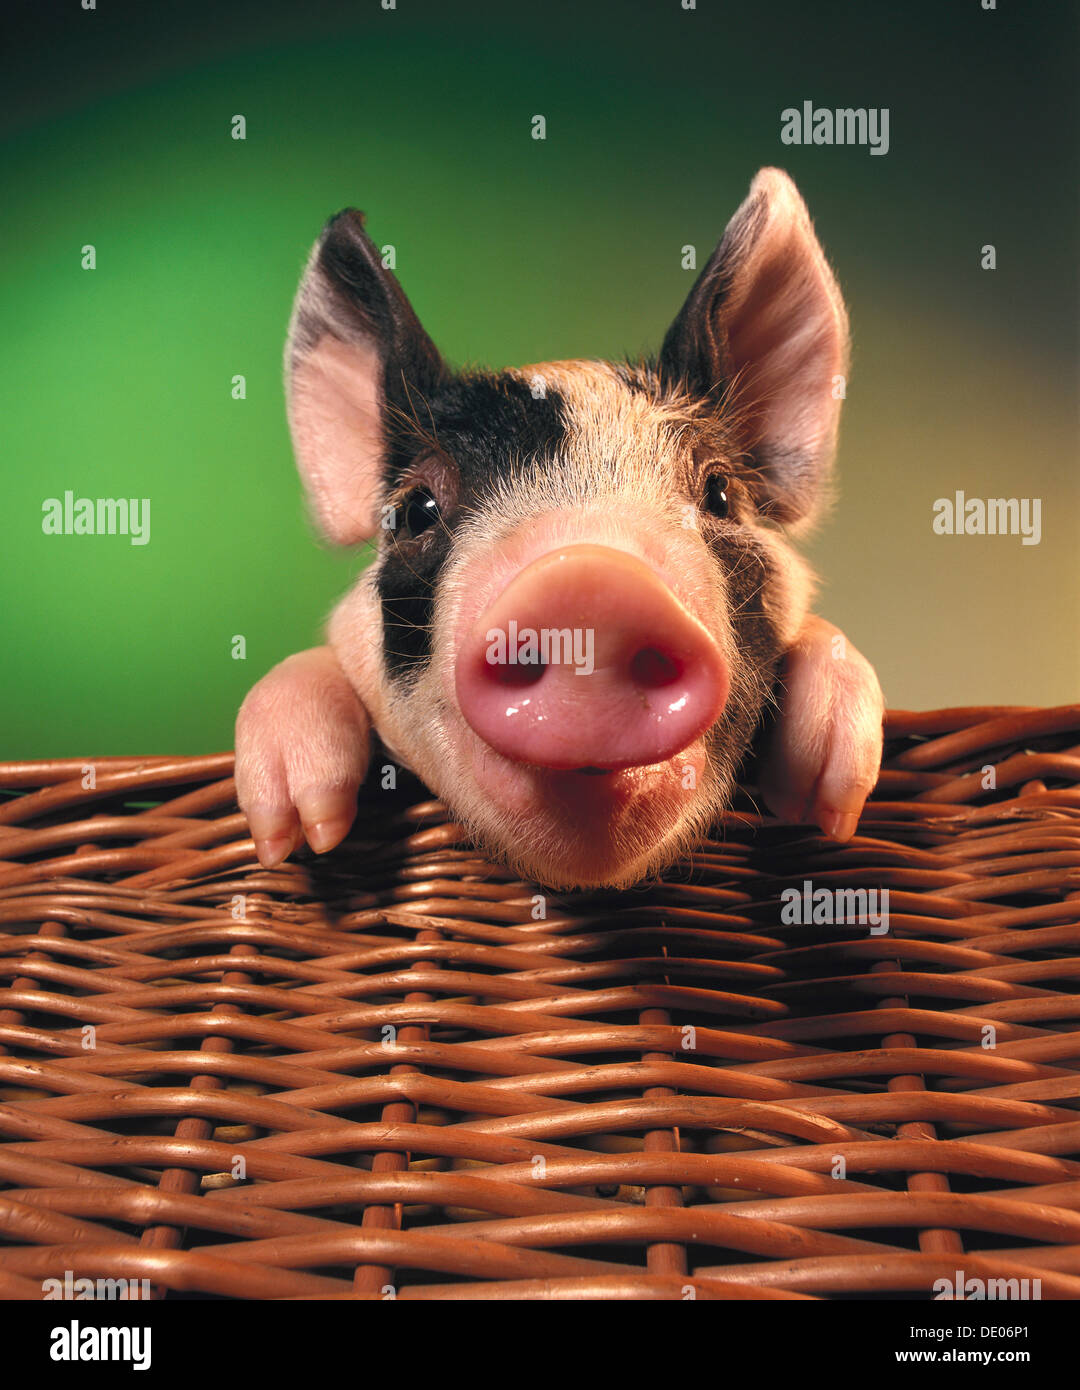 Piglet, black and white, in a basket Stock Photo